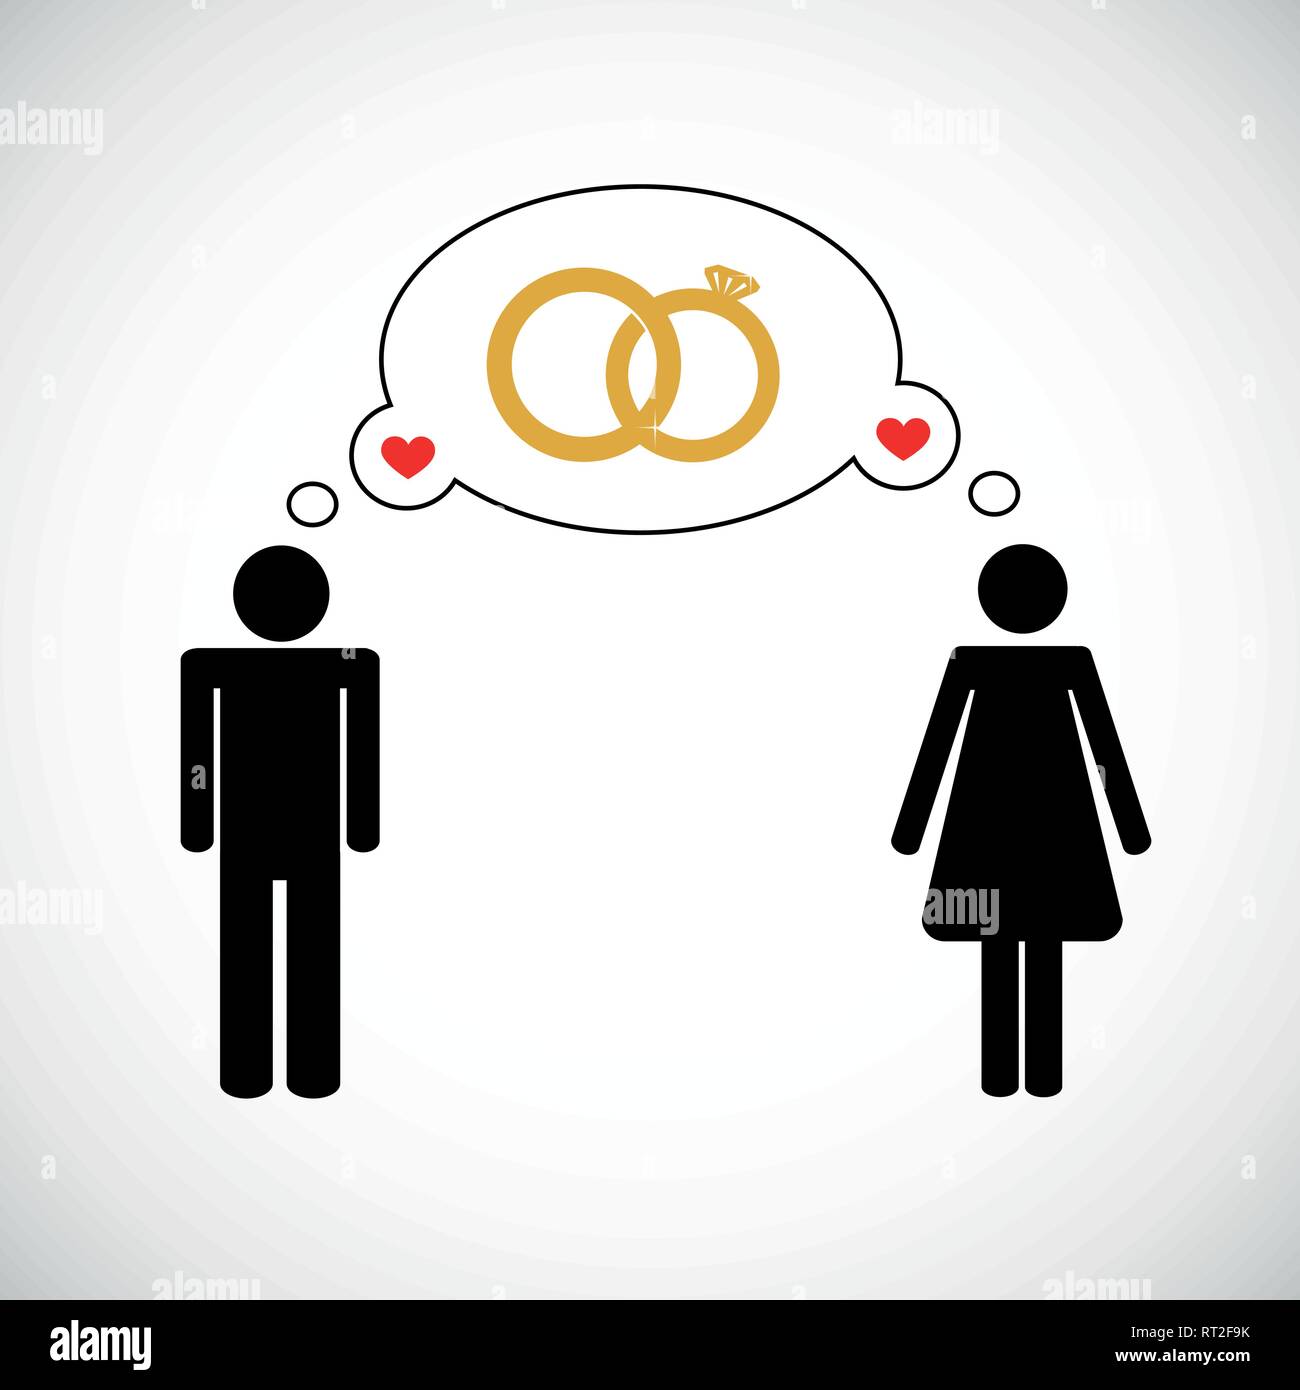 couple think about wedding pictogram vector illustration EPS10 Stock Vector